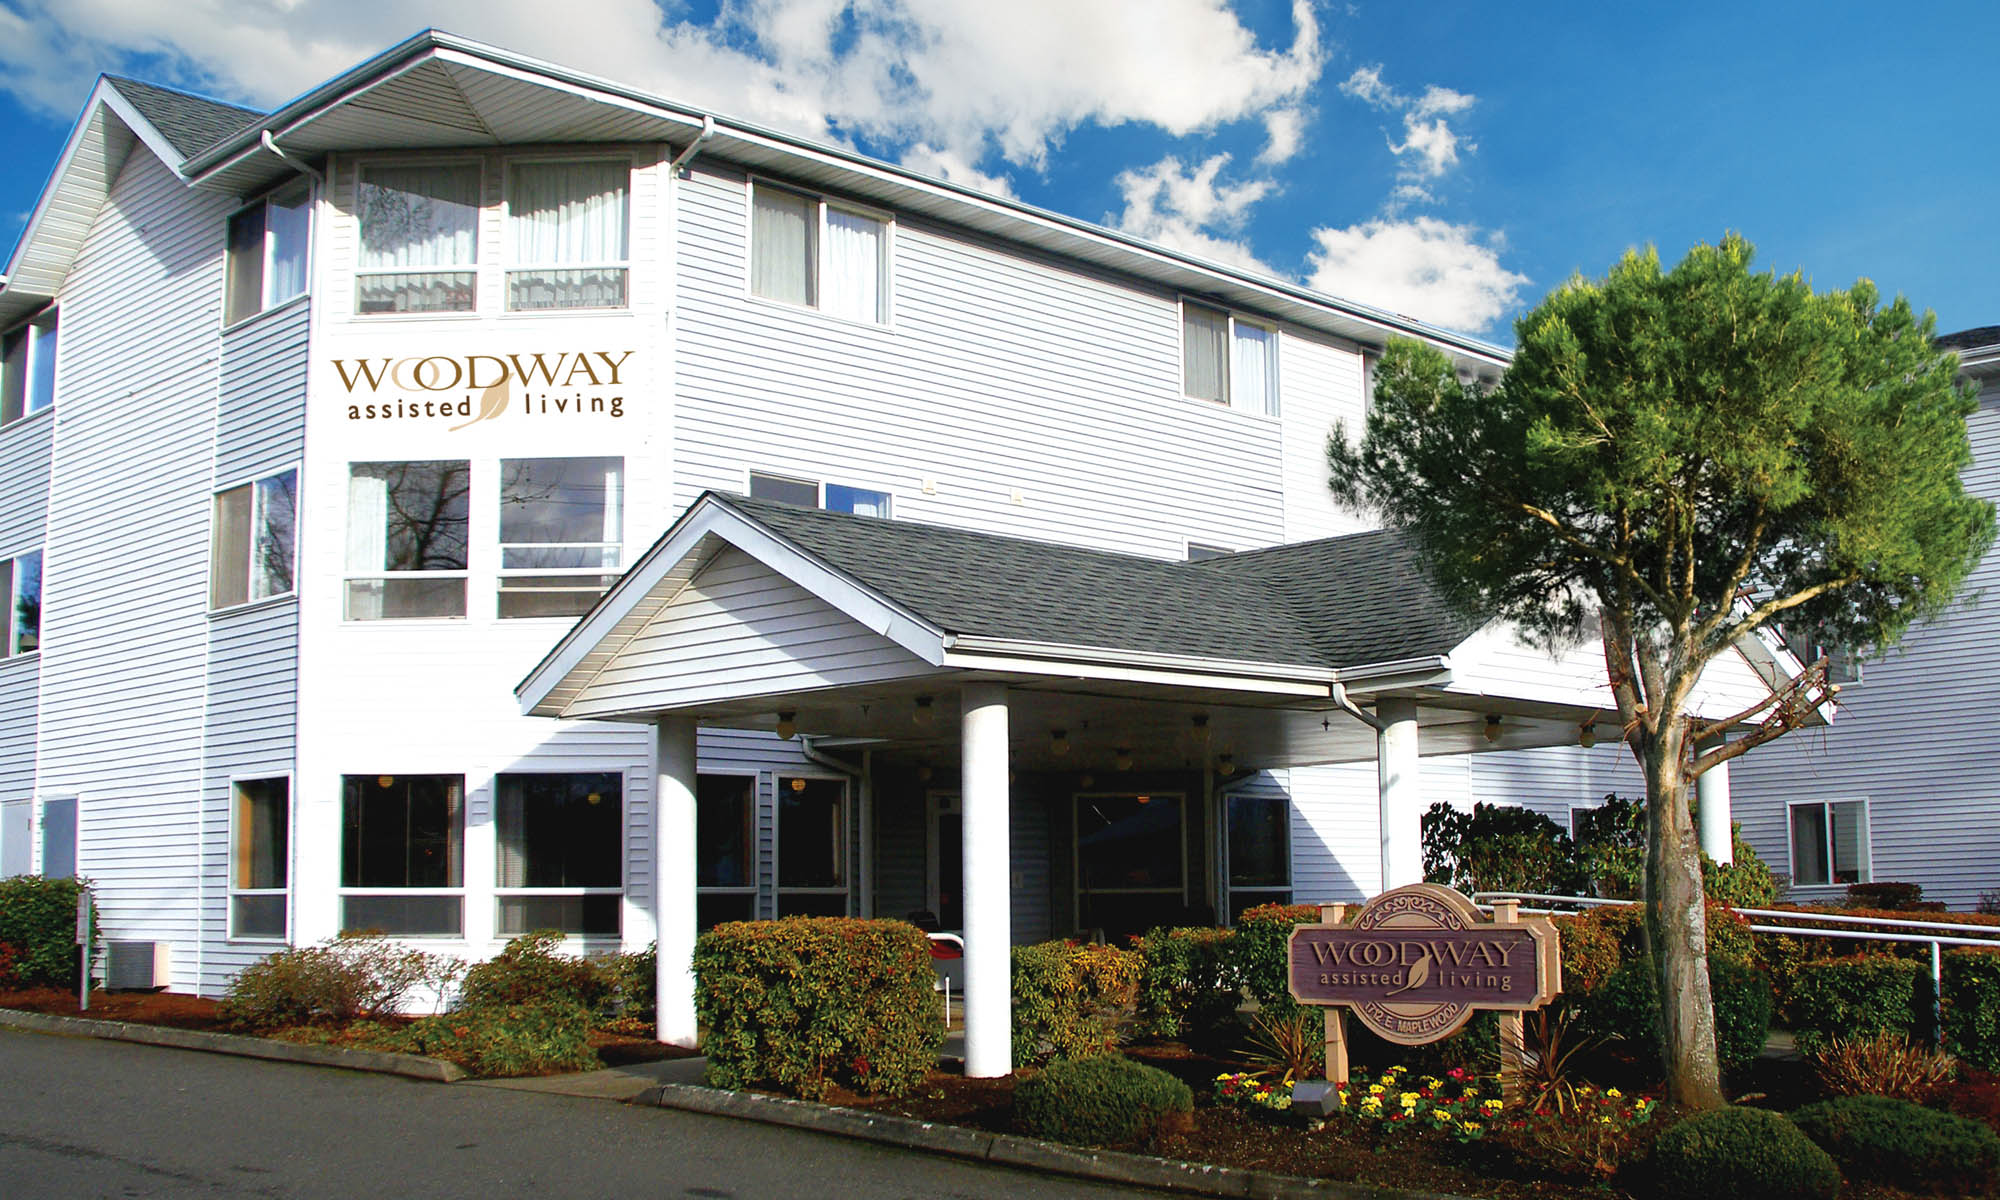 Woodway Assisted Living